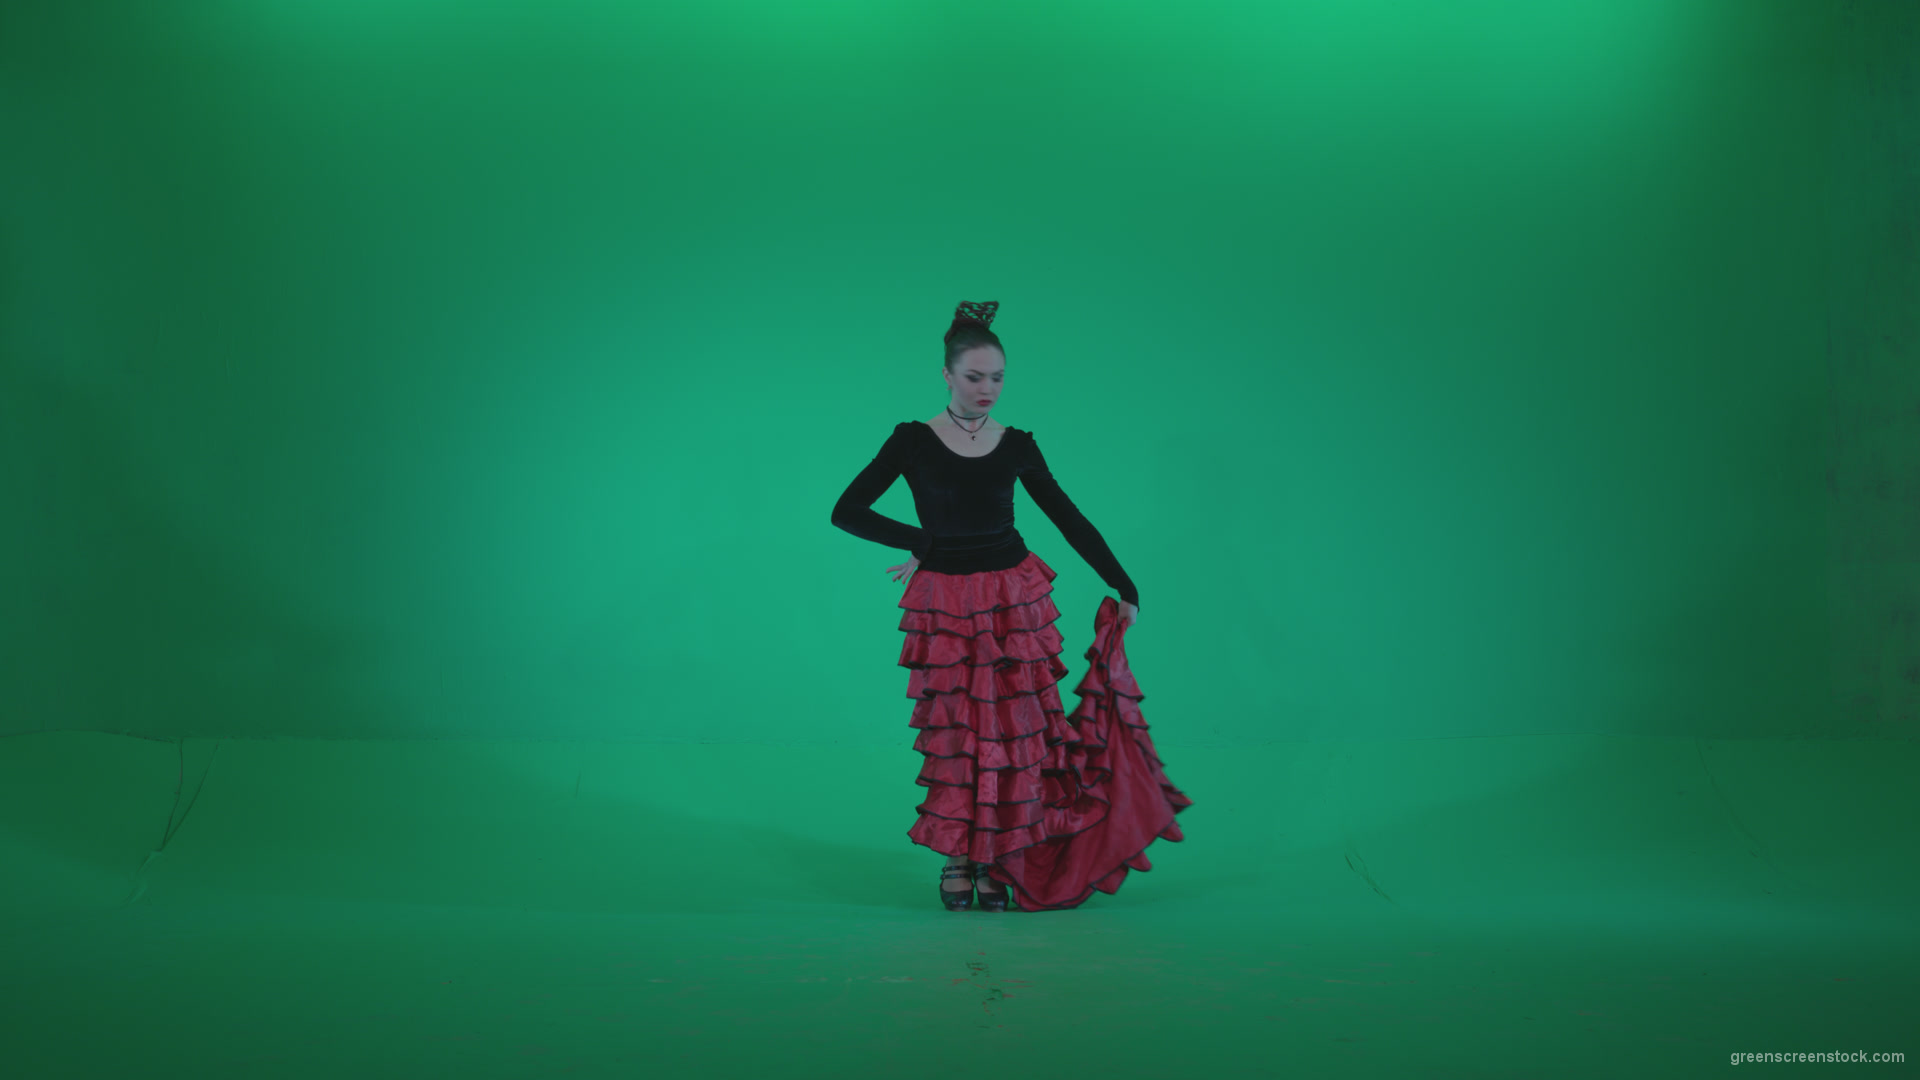 Flamenco-Red-and-Black-Dress-rb5-Green-Screen-Video-Footage_001 Green Screen Stock